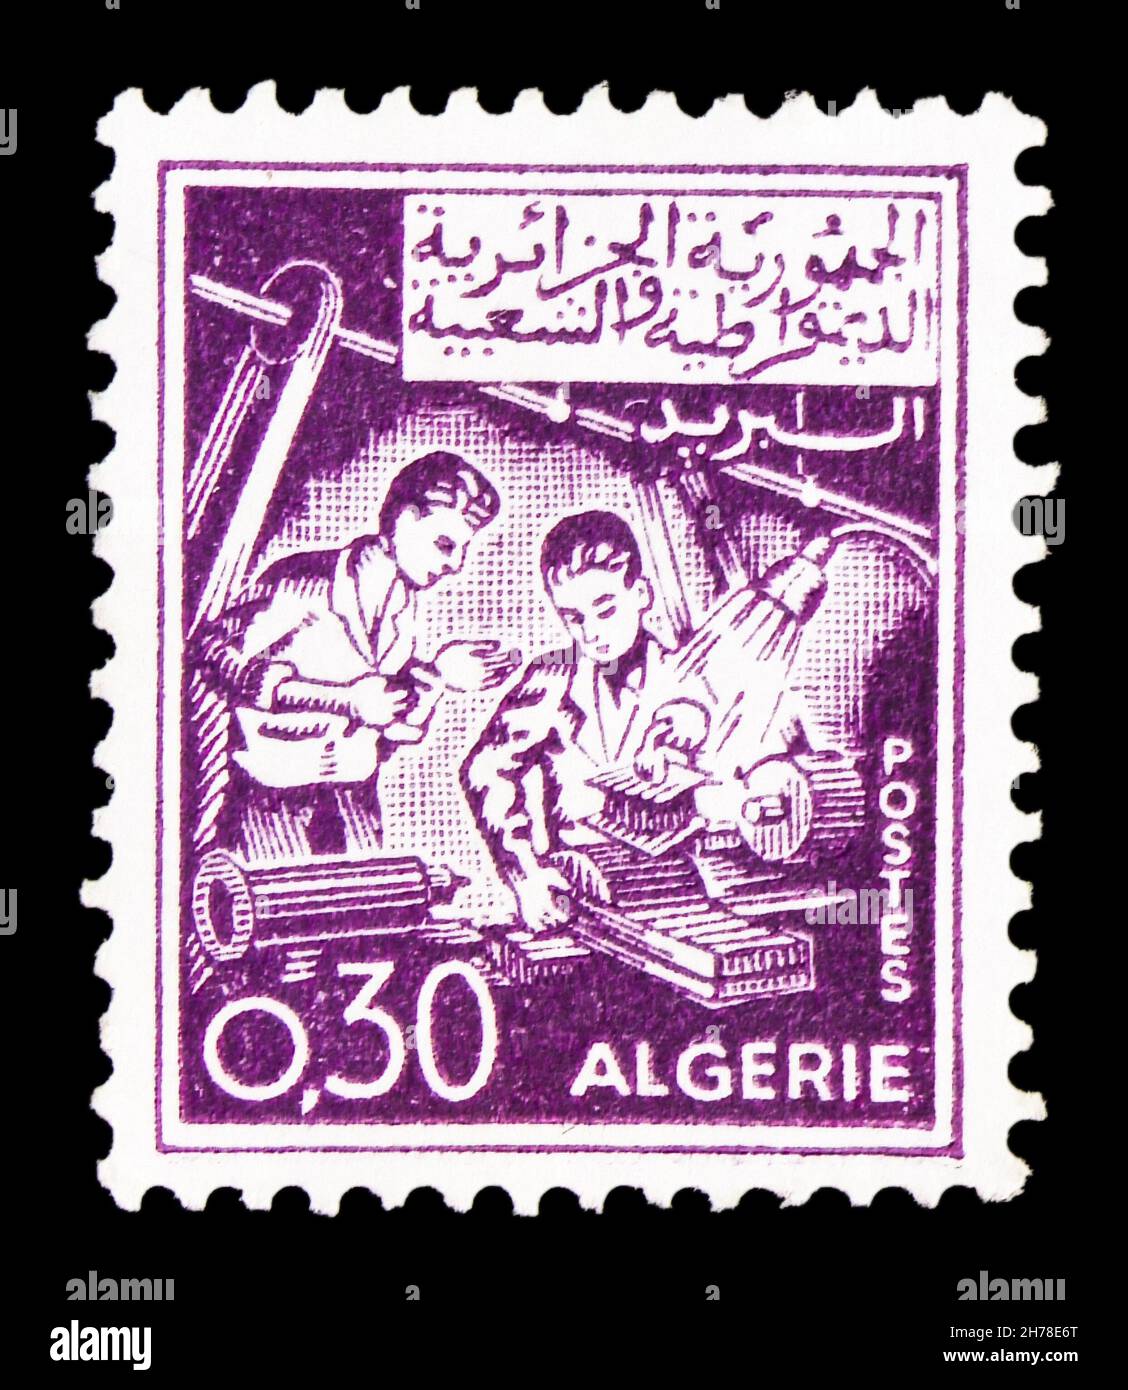 MOSCOW, RUSSIA - OCTOBER 25, 2021: Postage stamp printed in Algeria shows Mechanics, Definitives (1964-65) serie, circa 1965 Stock Photo